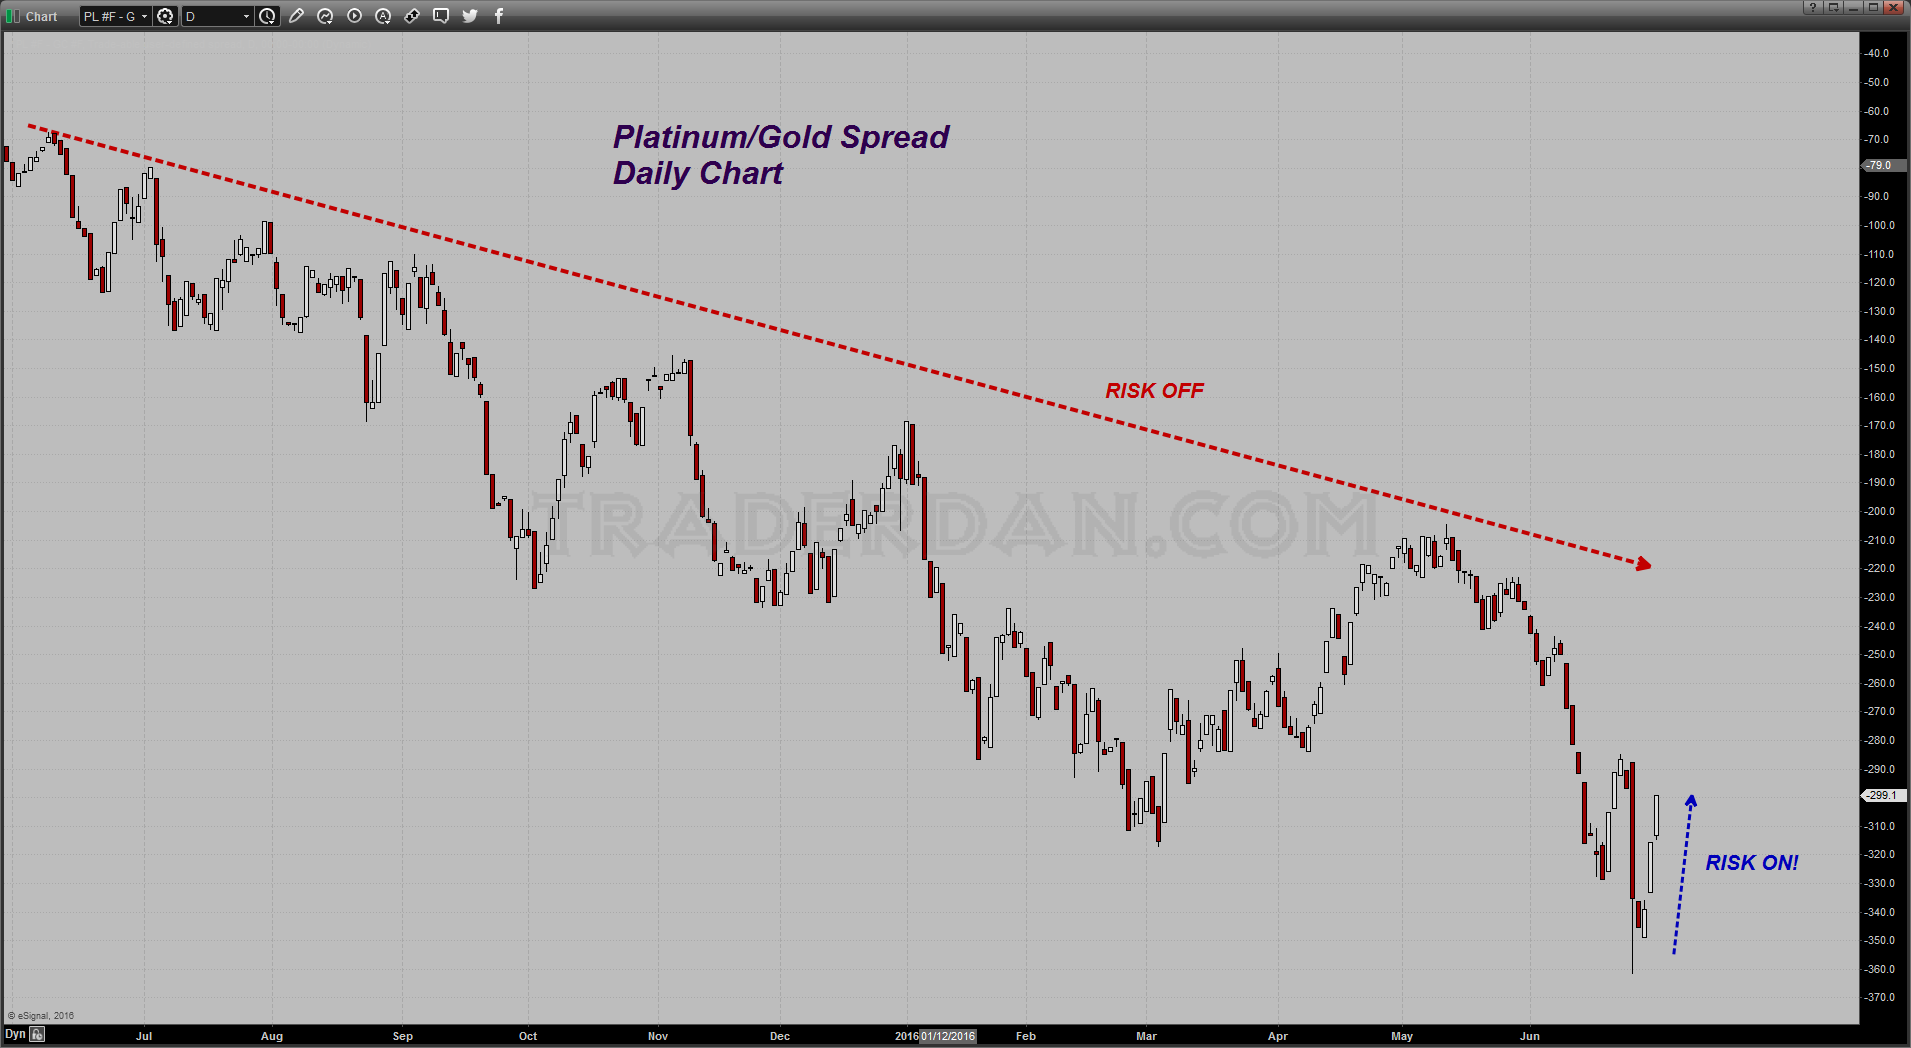 Platinum-Gold Spread Daily Chart